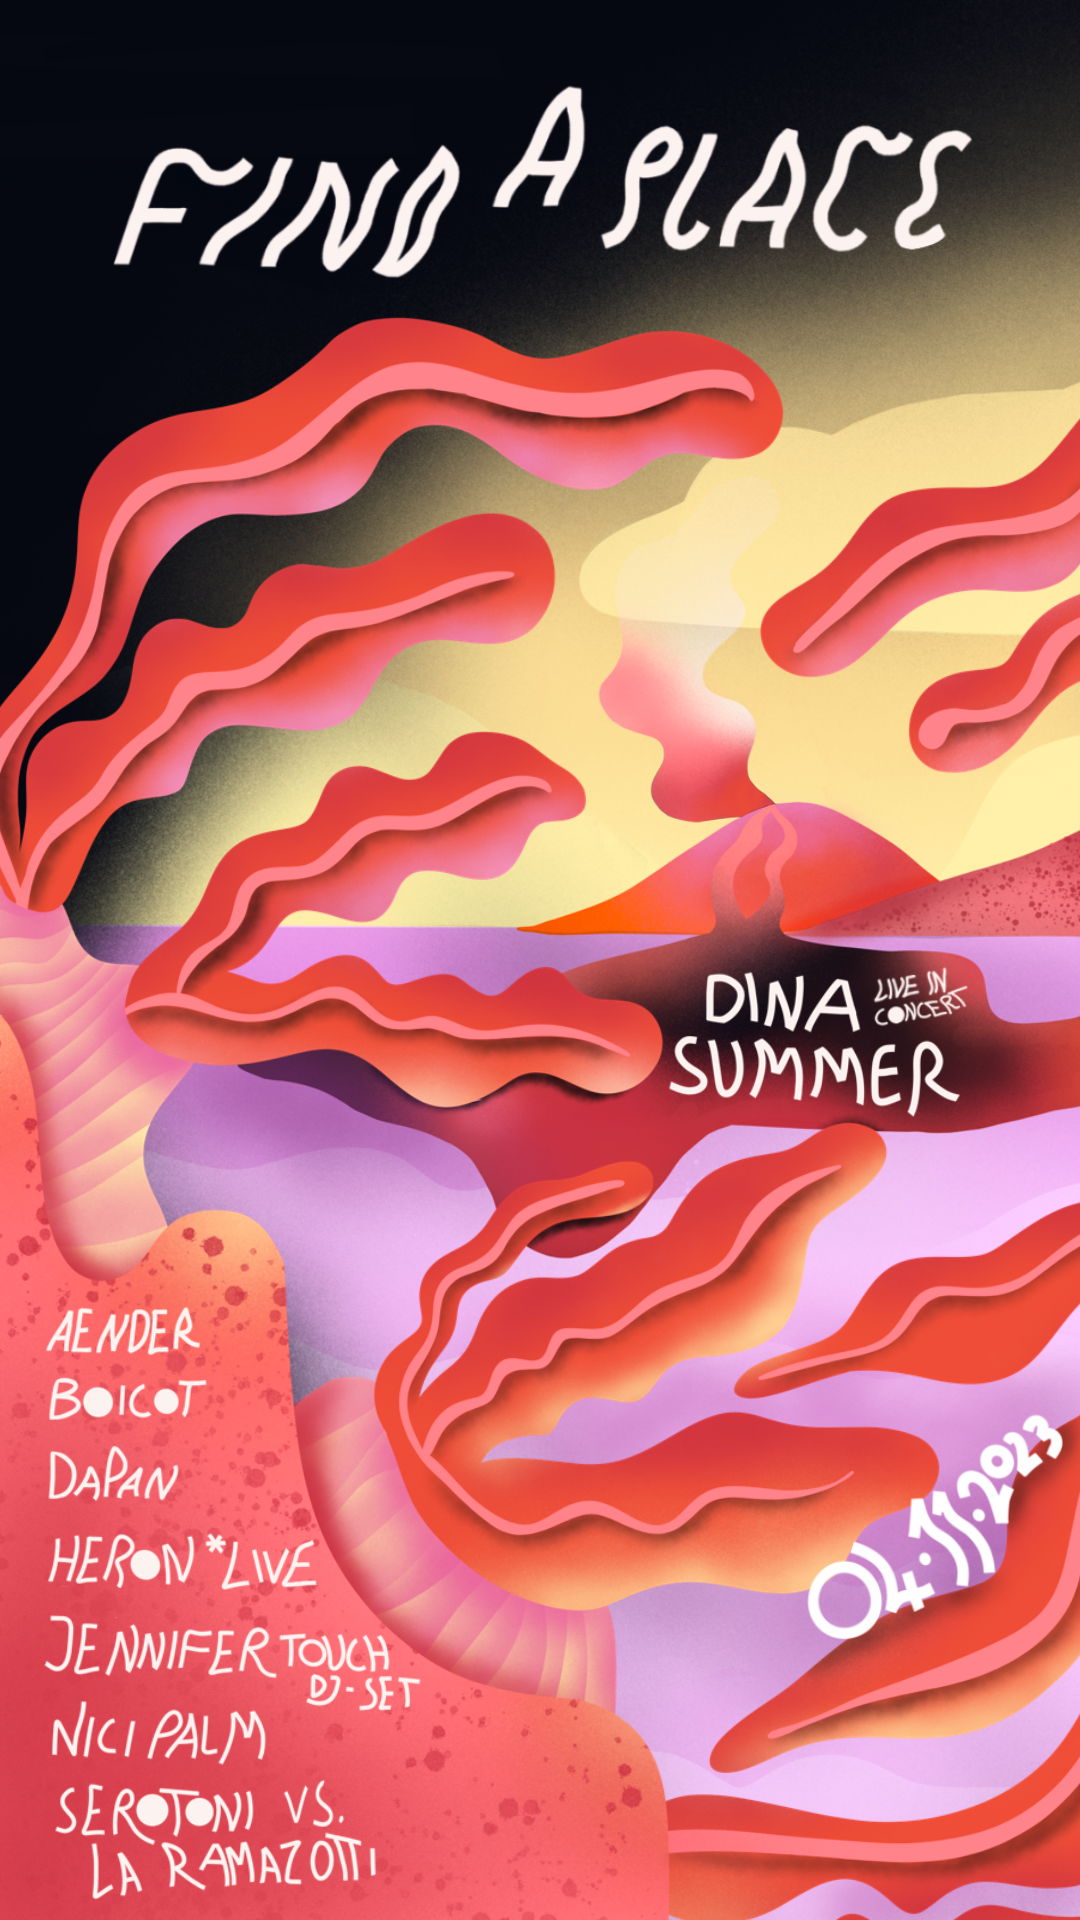 Find a Place with Dina Summer - フライヤー表